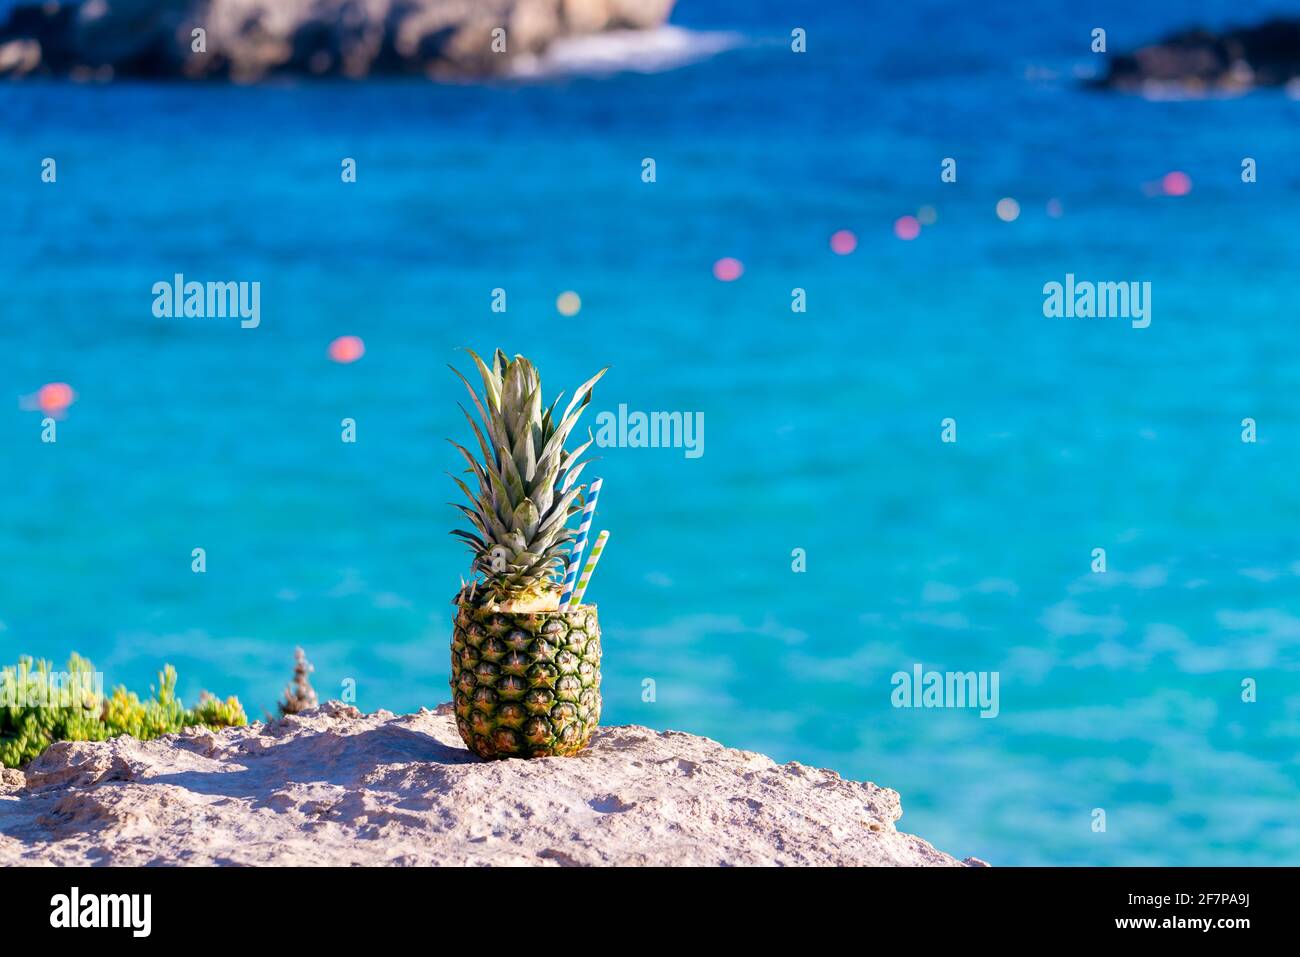 Cocktail in pineapple on the background of the blue sea Stock Photo